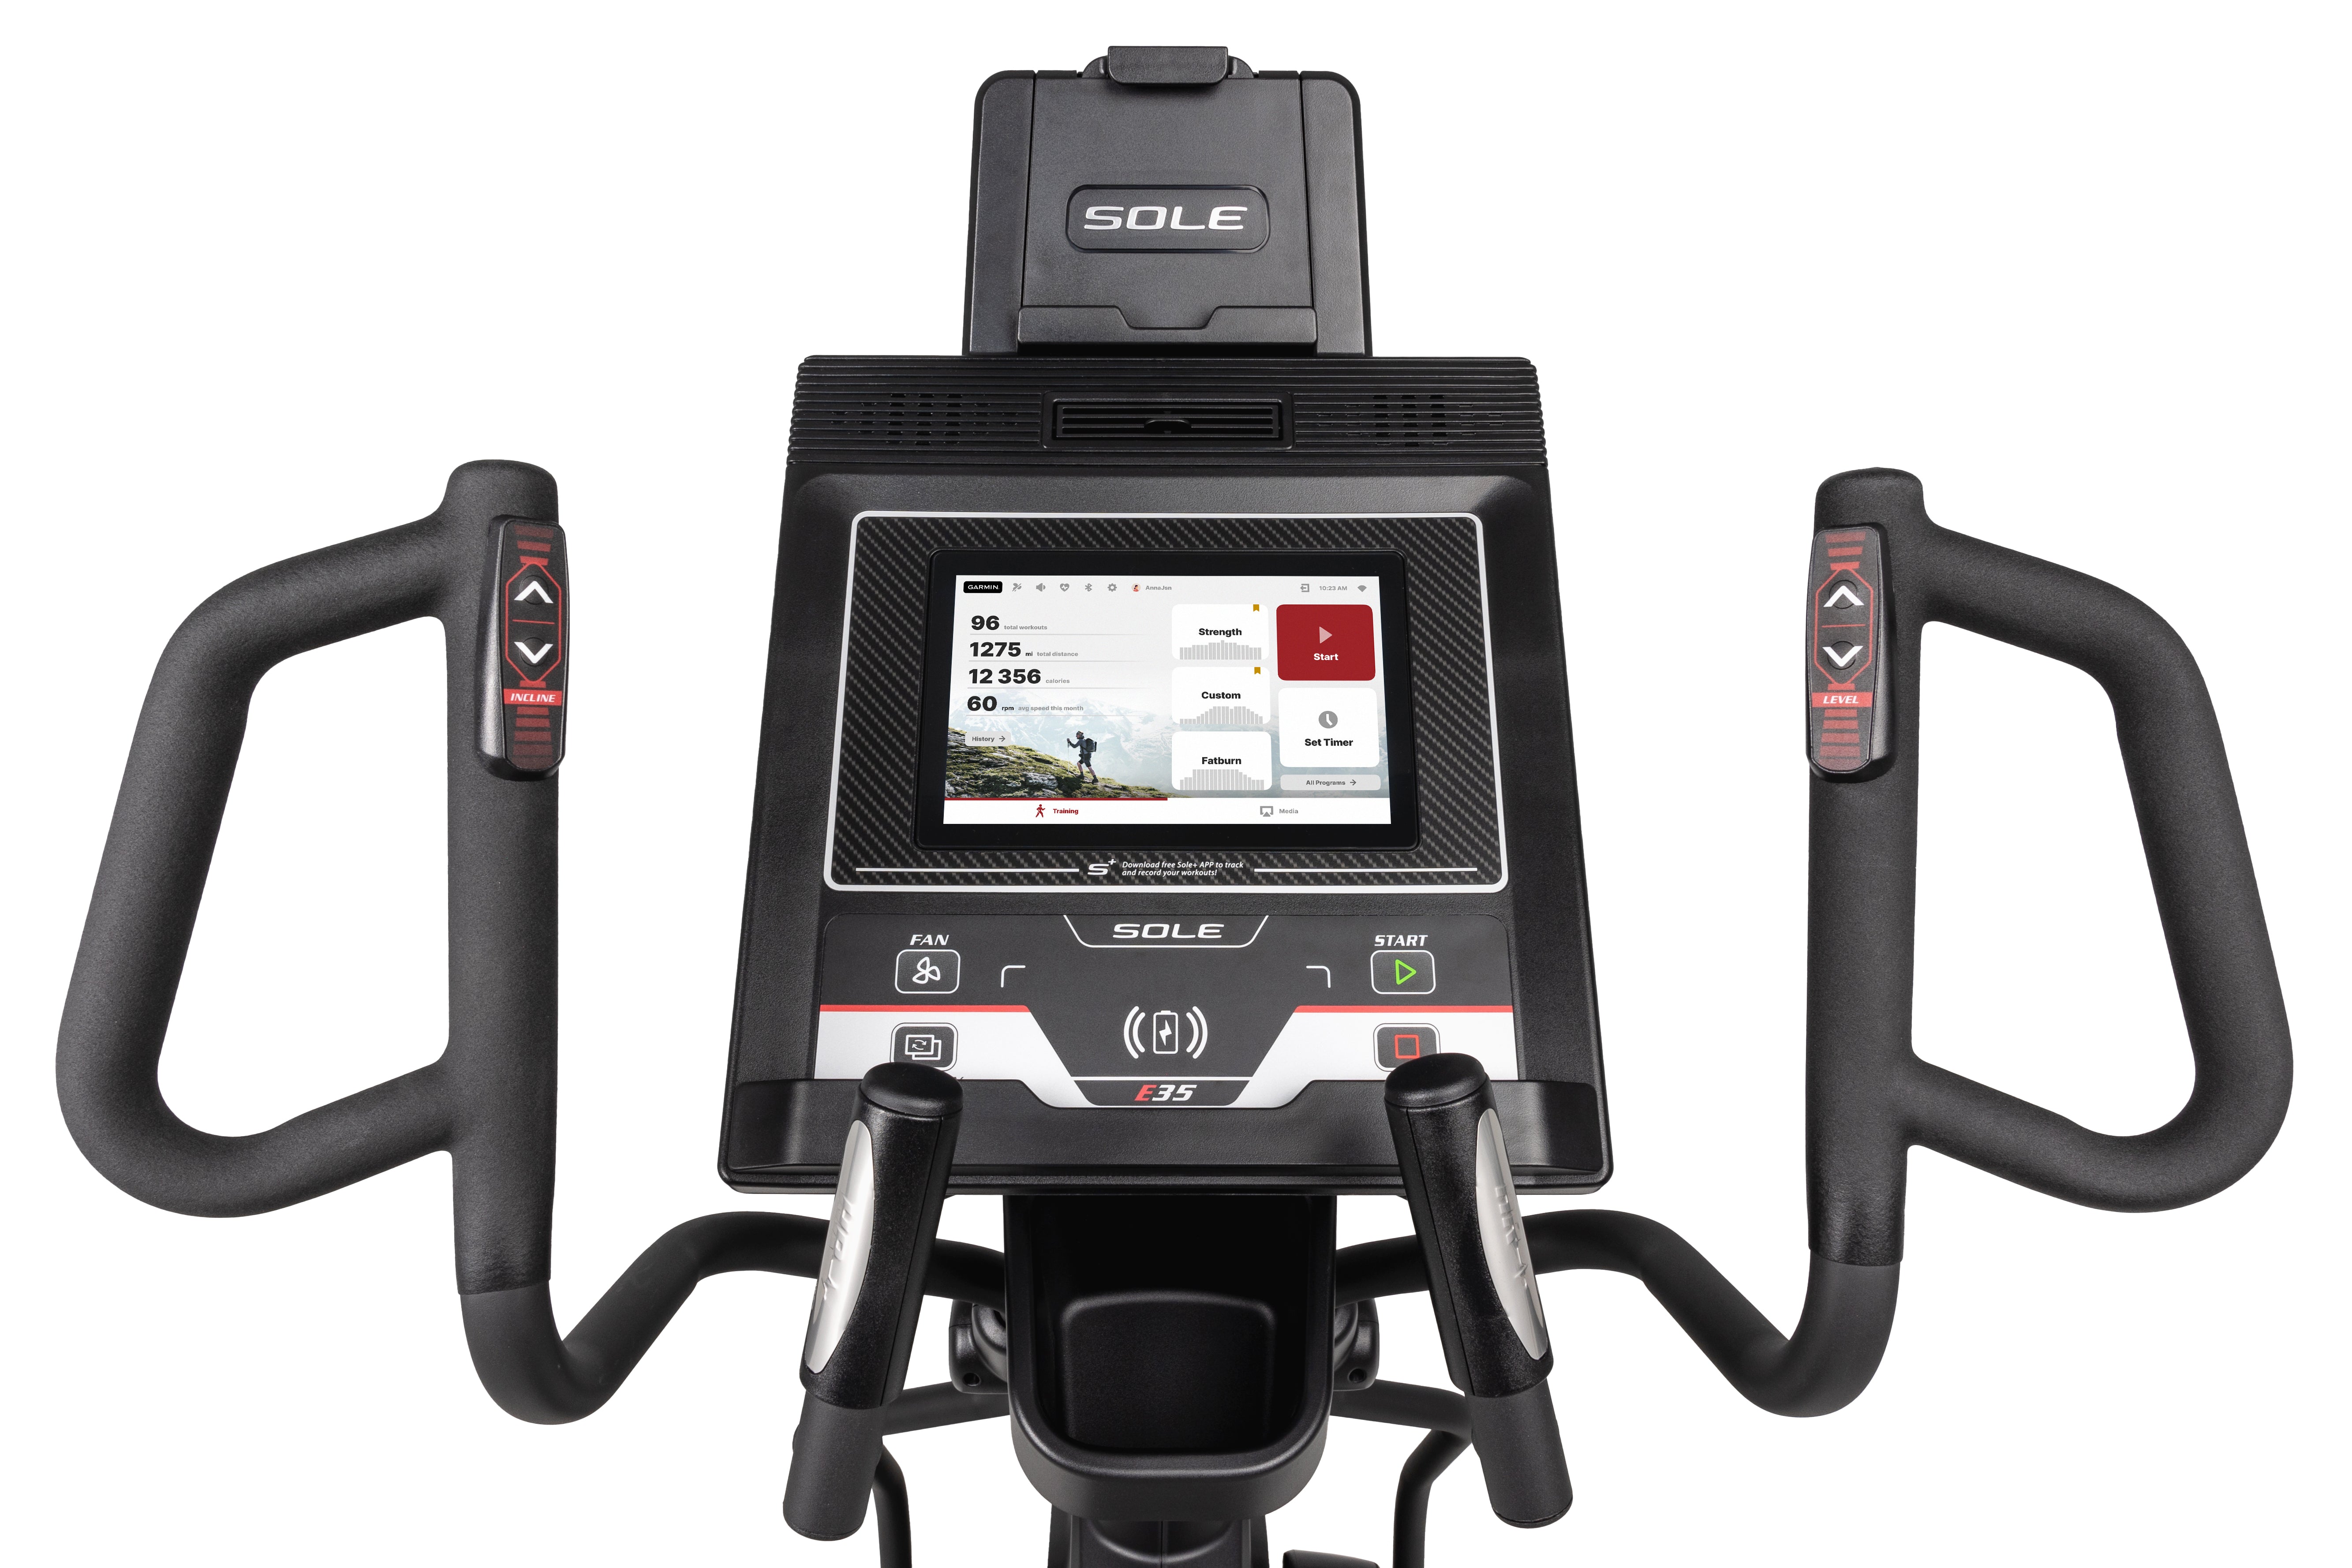 Close-up view of the Sole E35 elliptical machine's console area. The digital touchscreen displays fitness metrics with a map interface. Surrounding buttons include fan control, start, and labeled "E35". Flanking the console are cushioned handlebars with heart rate sensors, each adorned with red arrowed buttons for adjustments. The design is predominantly black with silver and red accents.